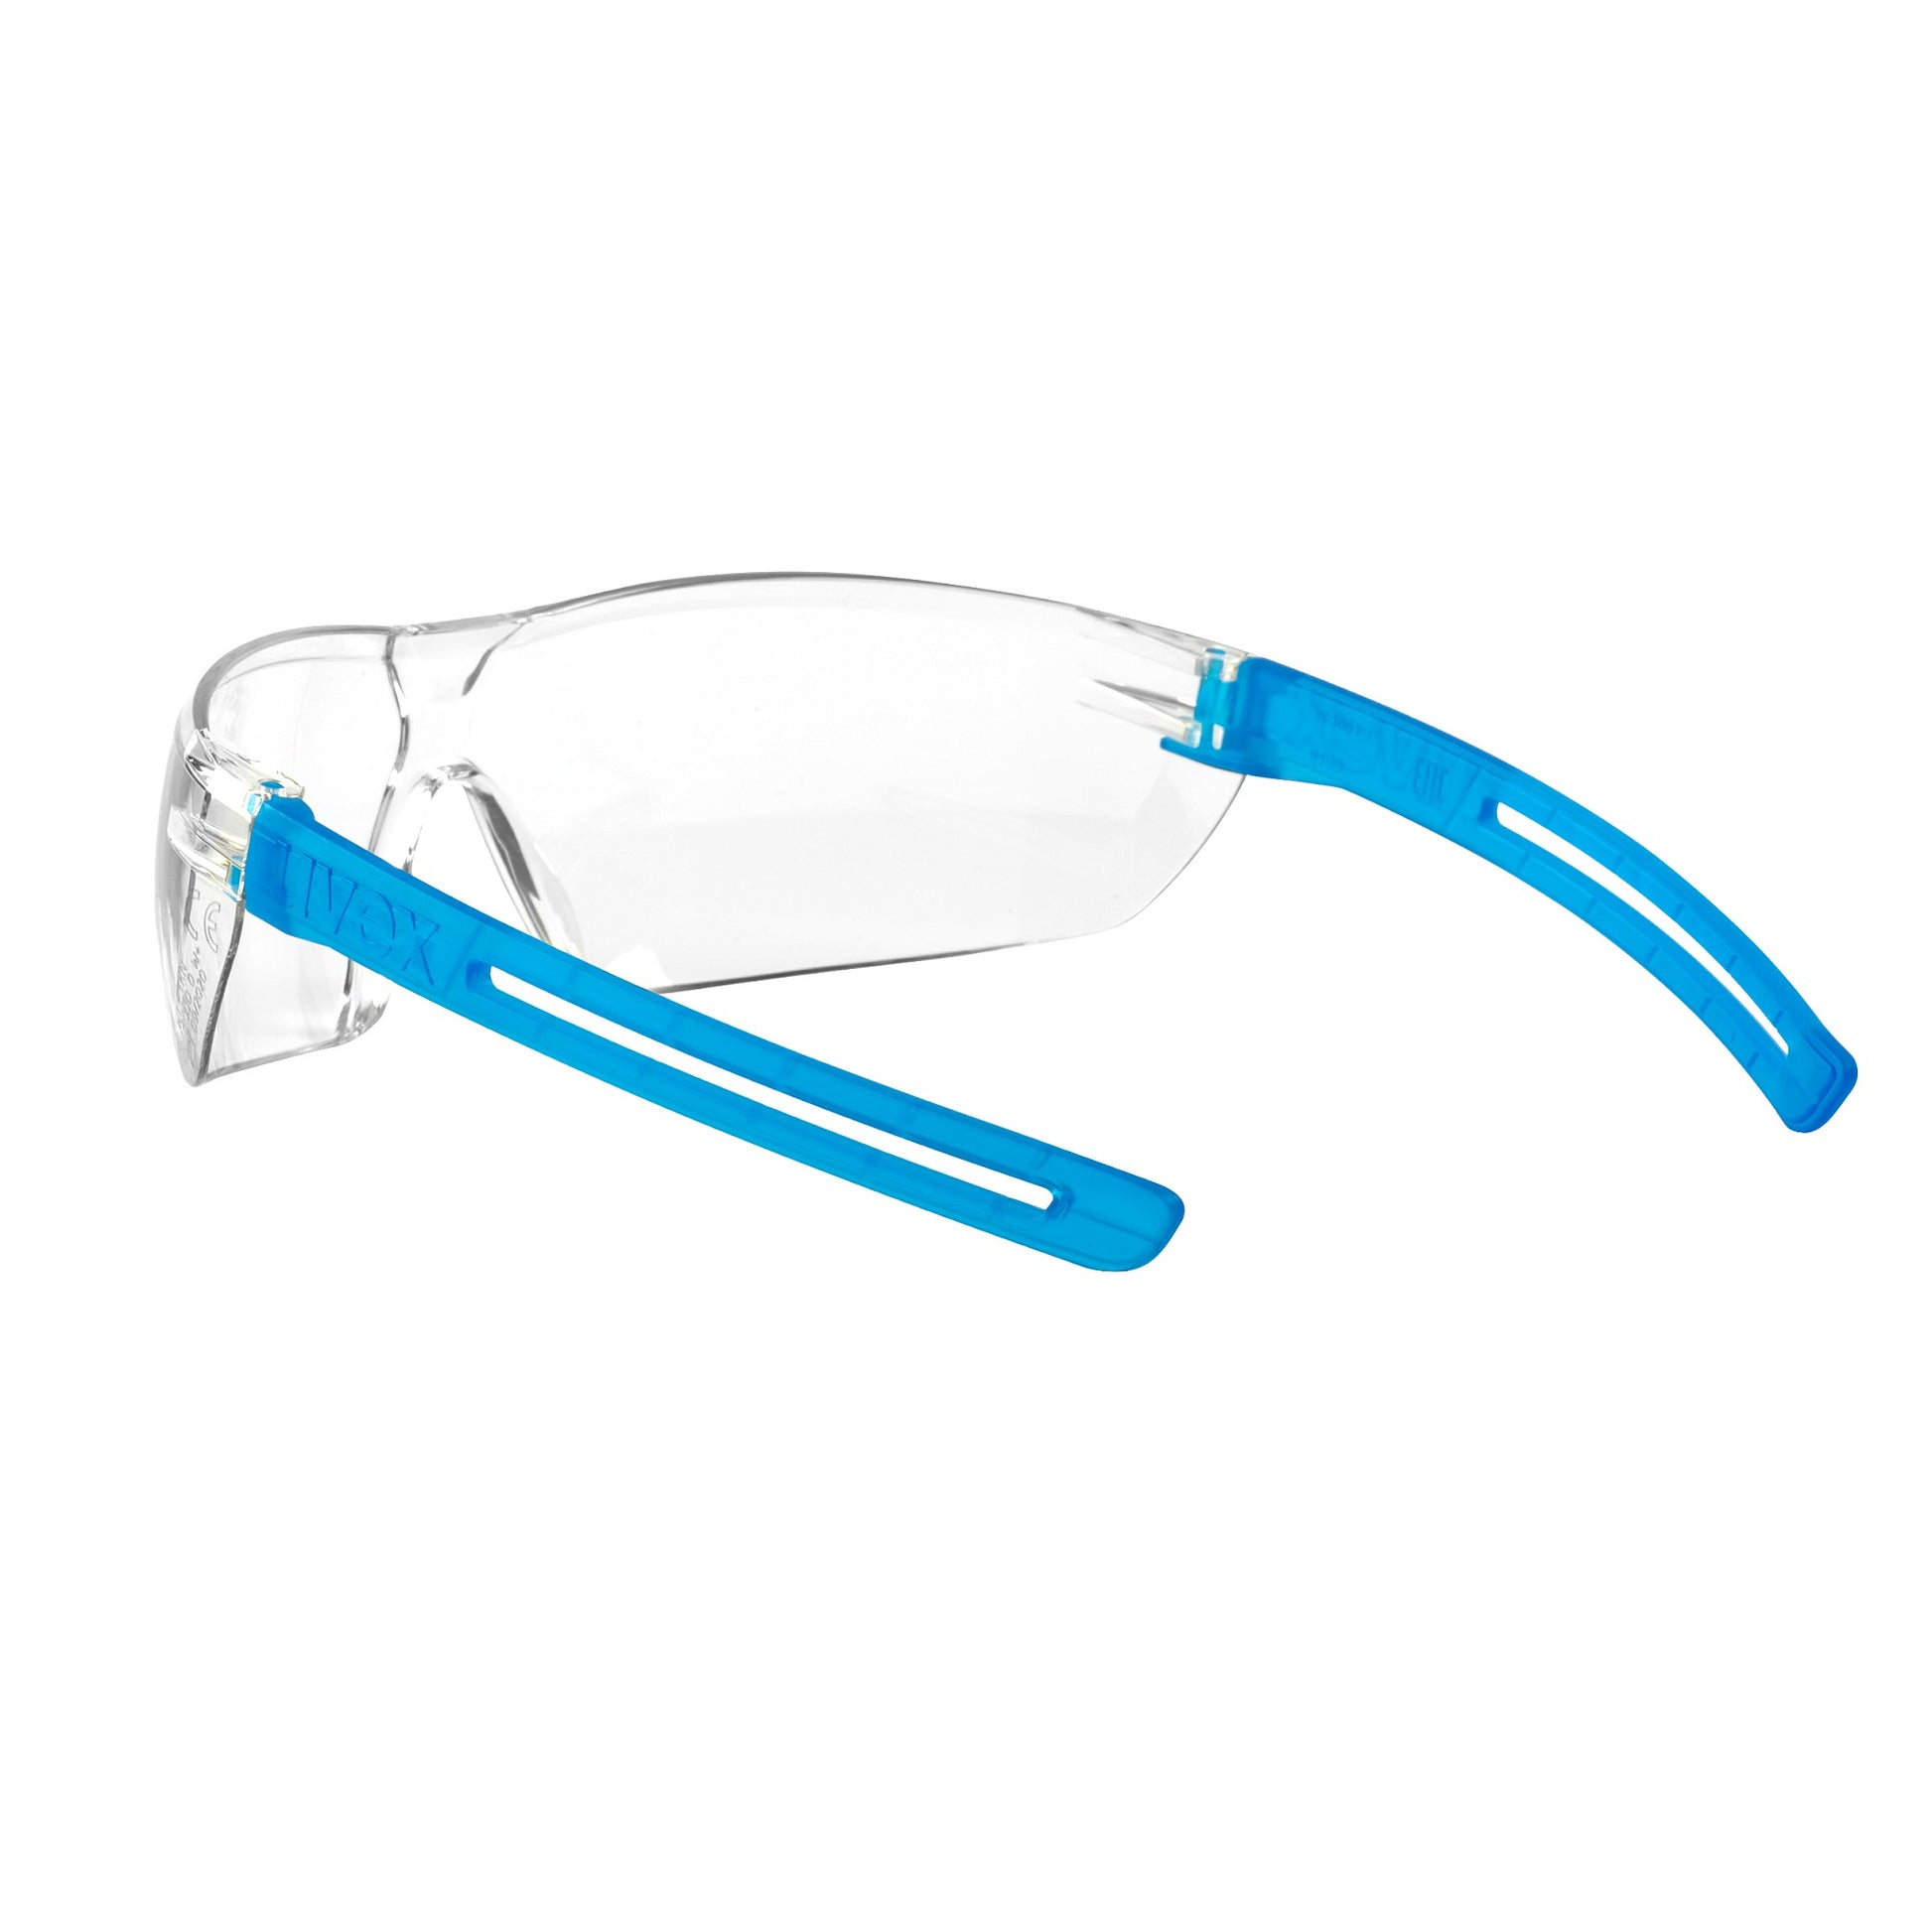 uvex x-fit Safety Glasses. Certified according to EN 166 (personal eye protection) and EN 170 (UV protection filter). protexU